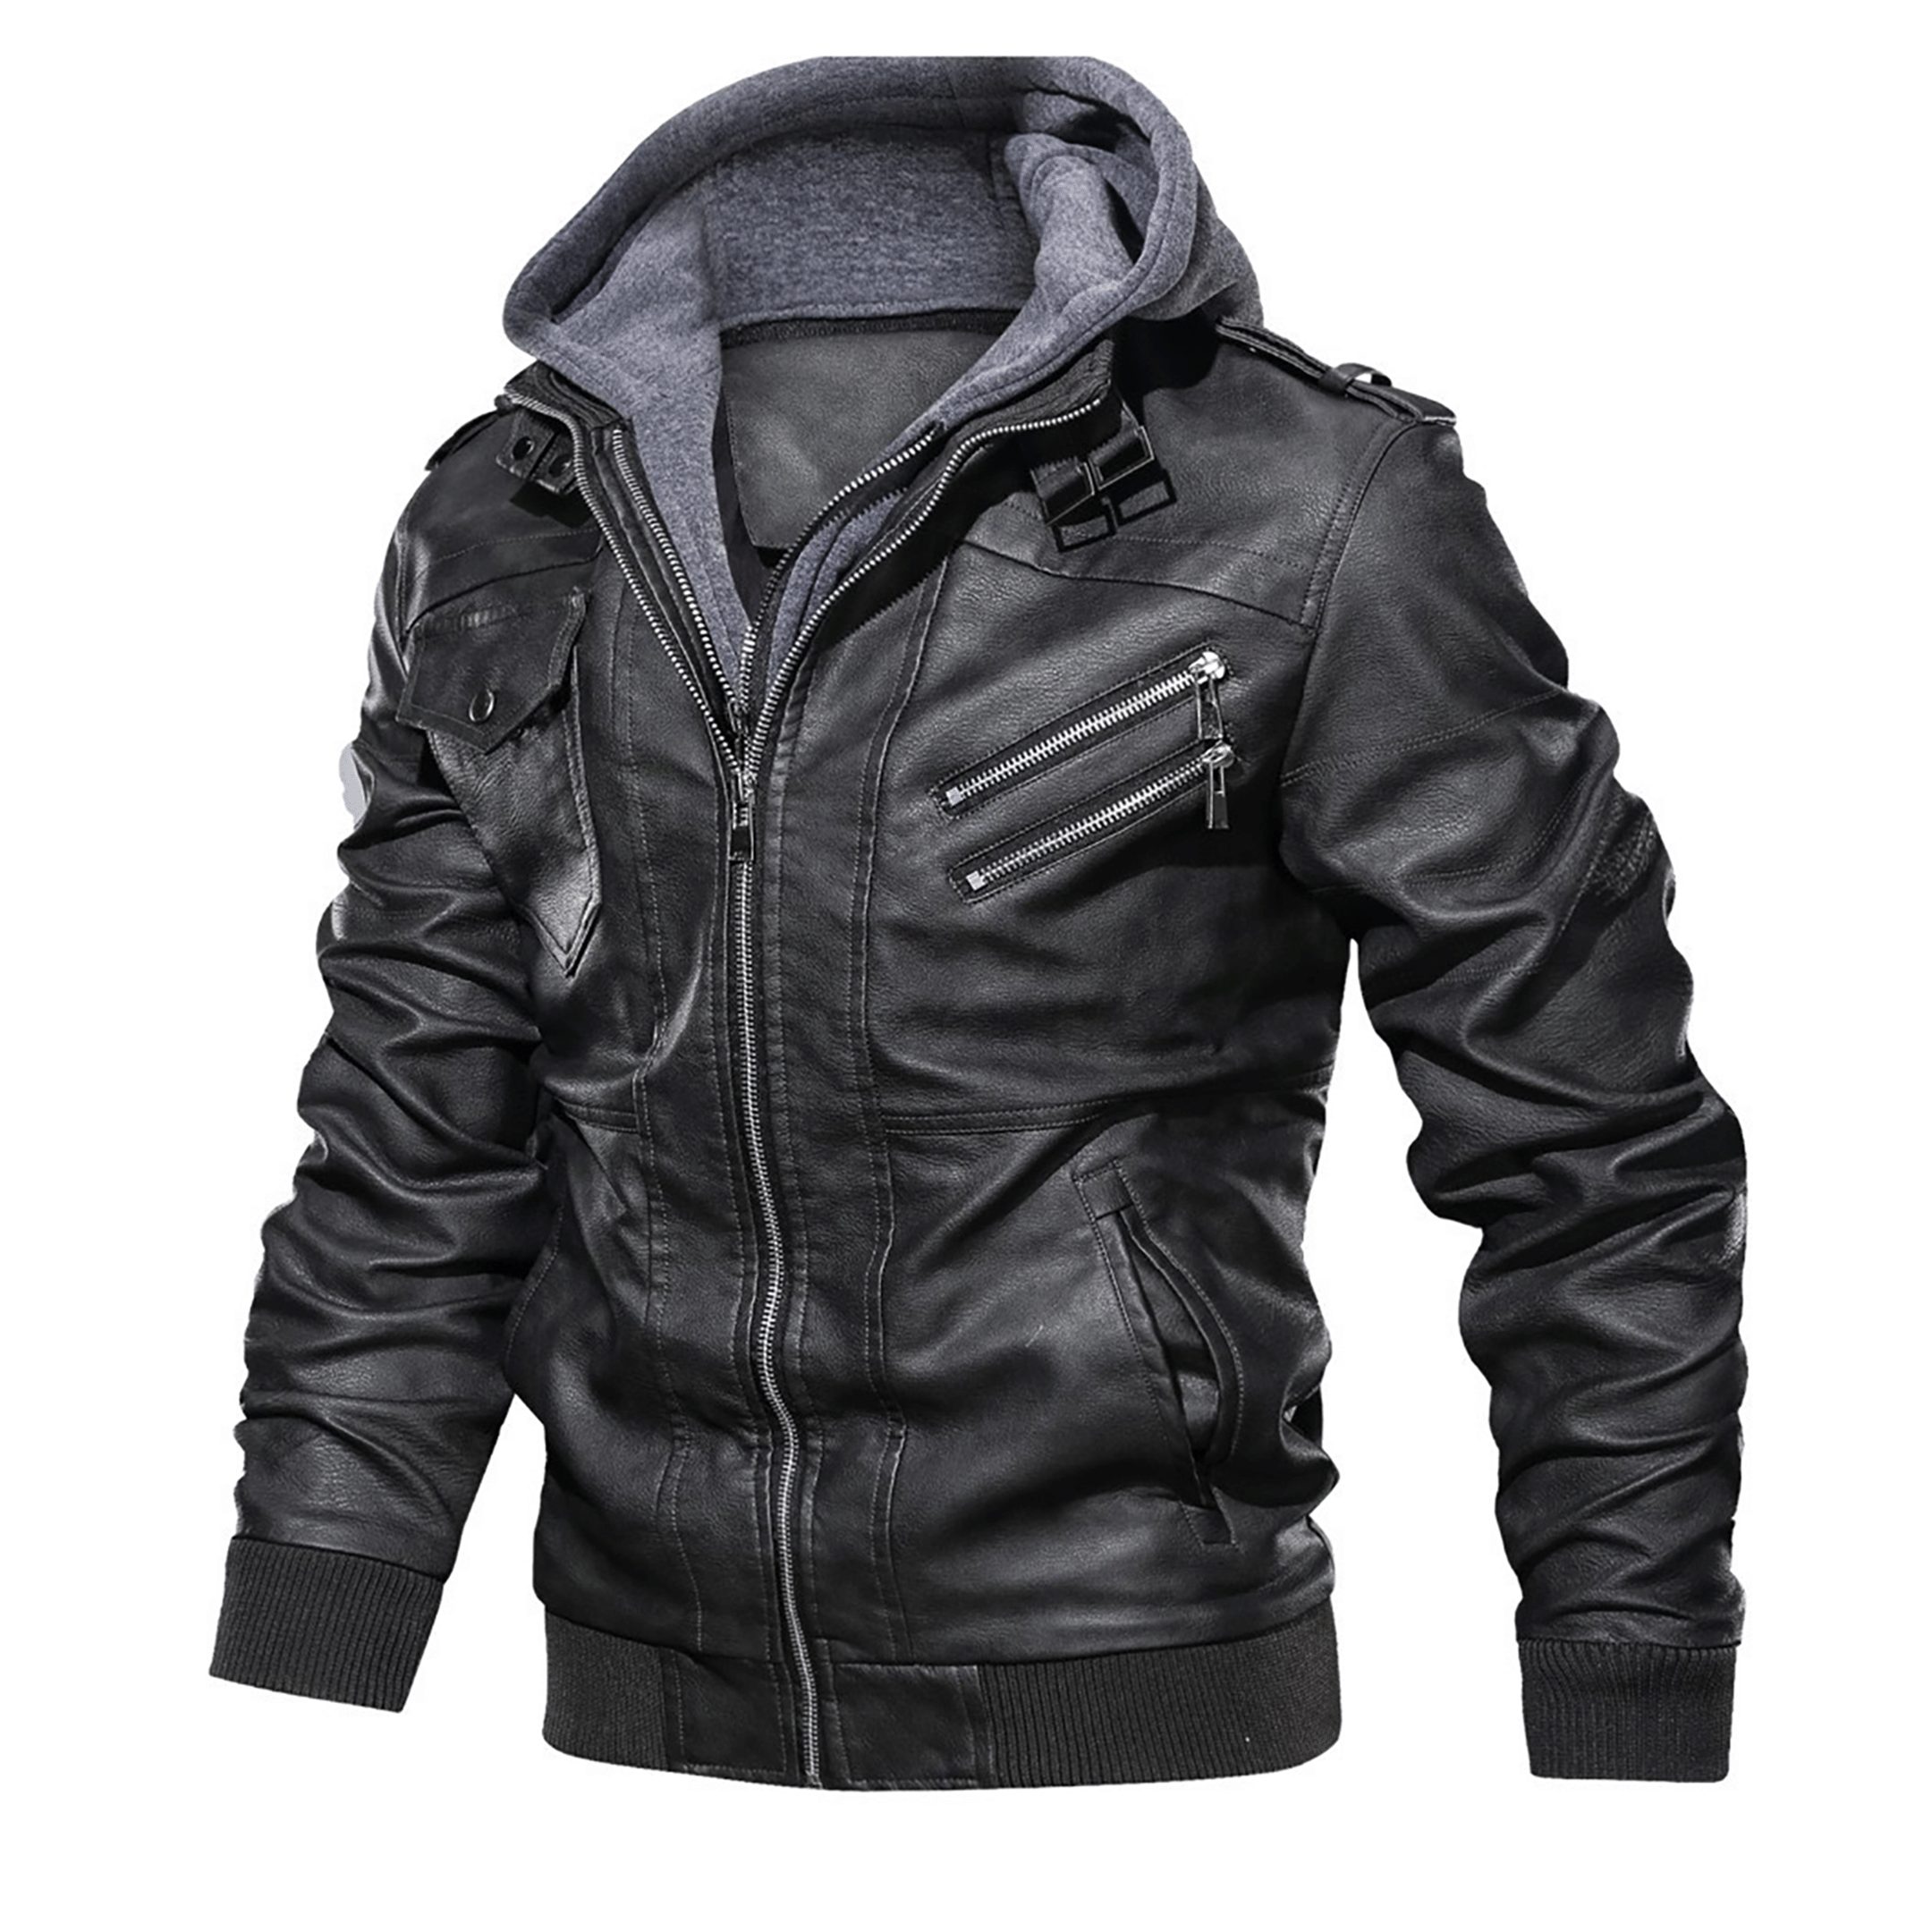 Top leather jackets and latest products 379